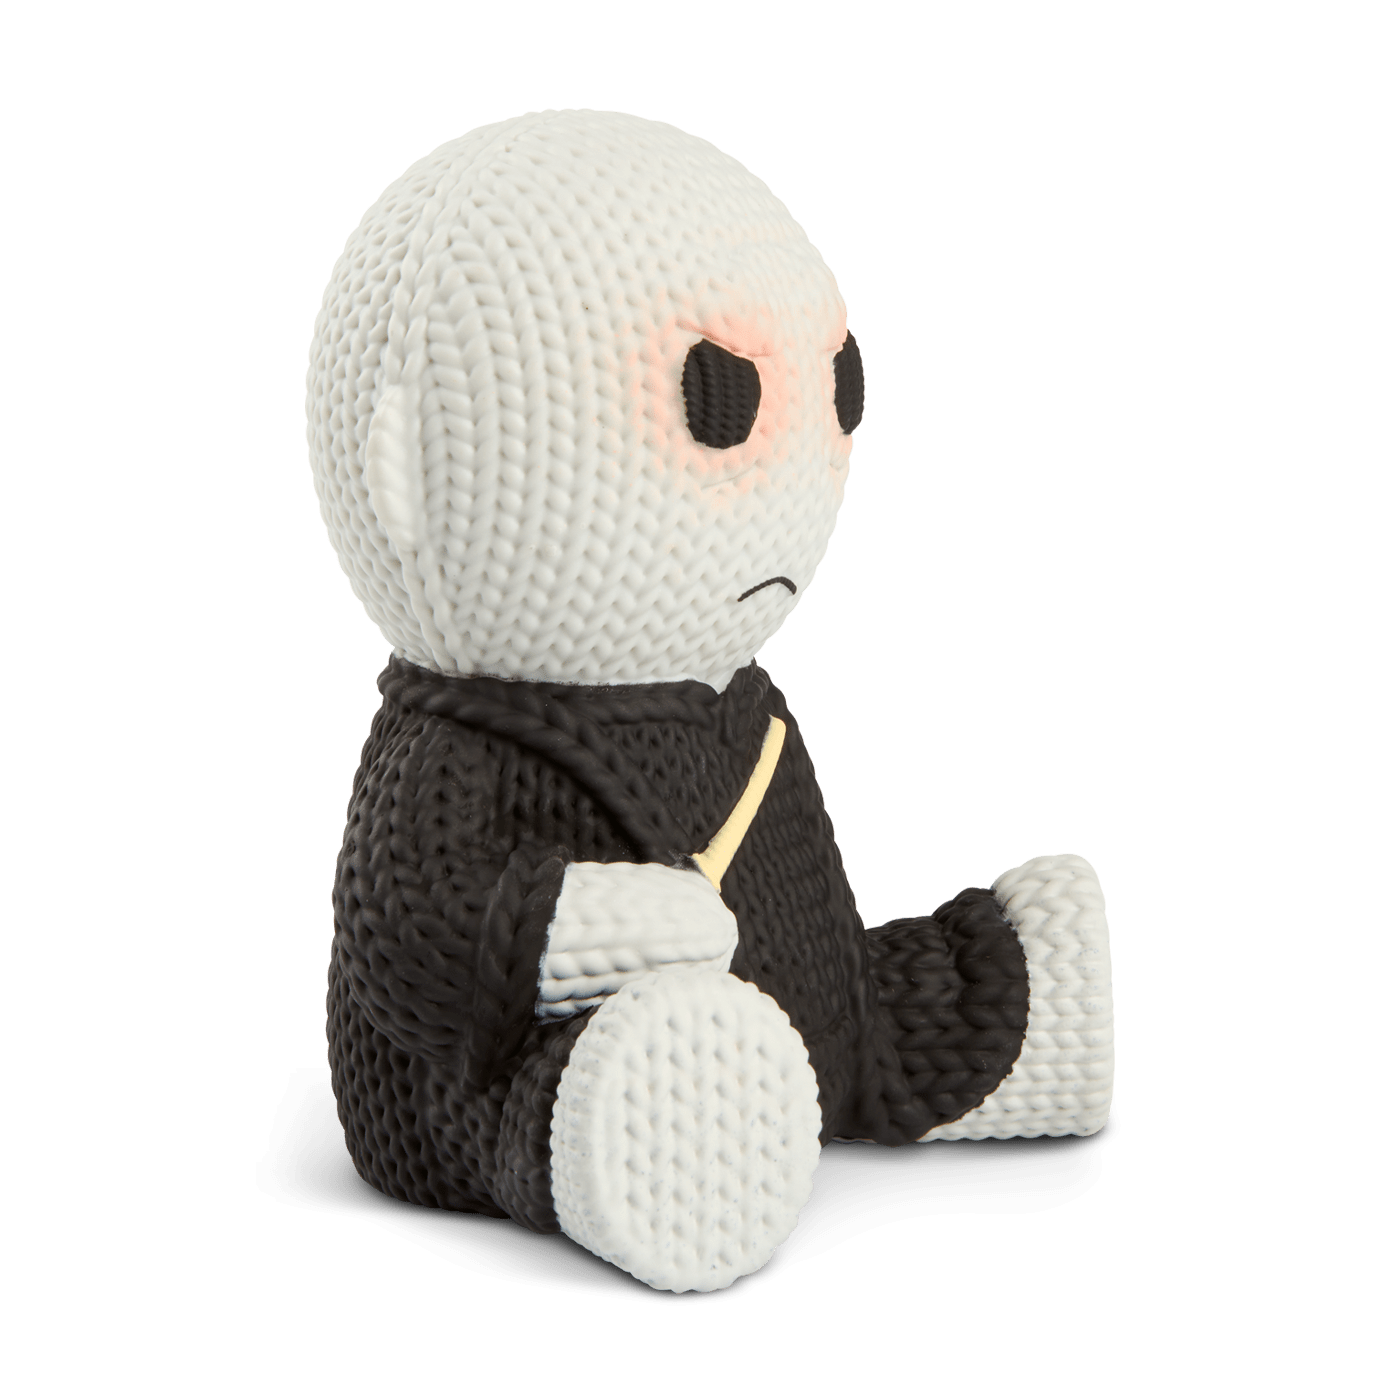 Lord Voldemort #066 - Harry Potter - Handmade by Robots